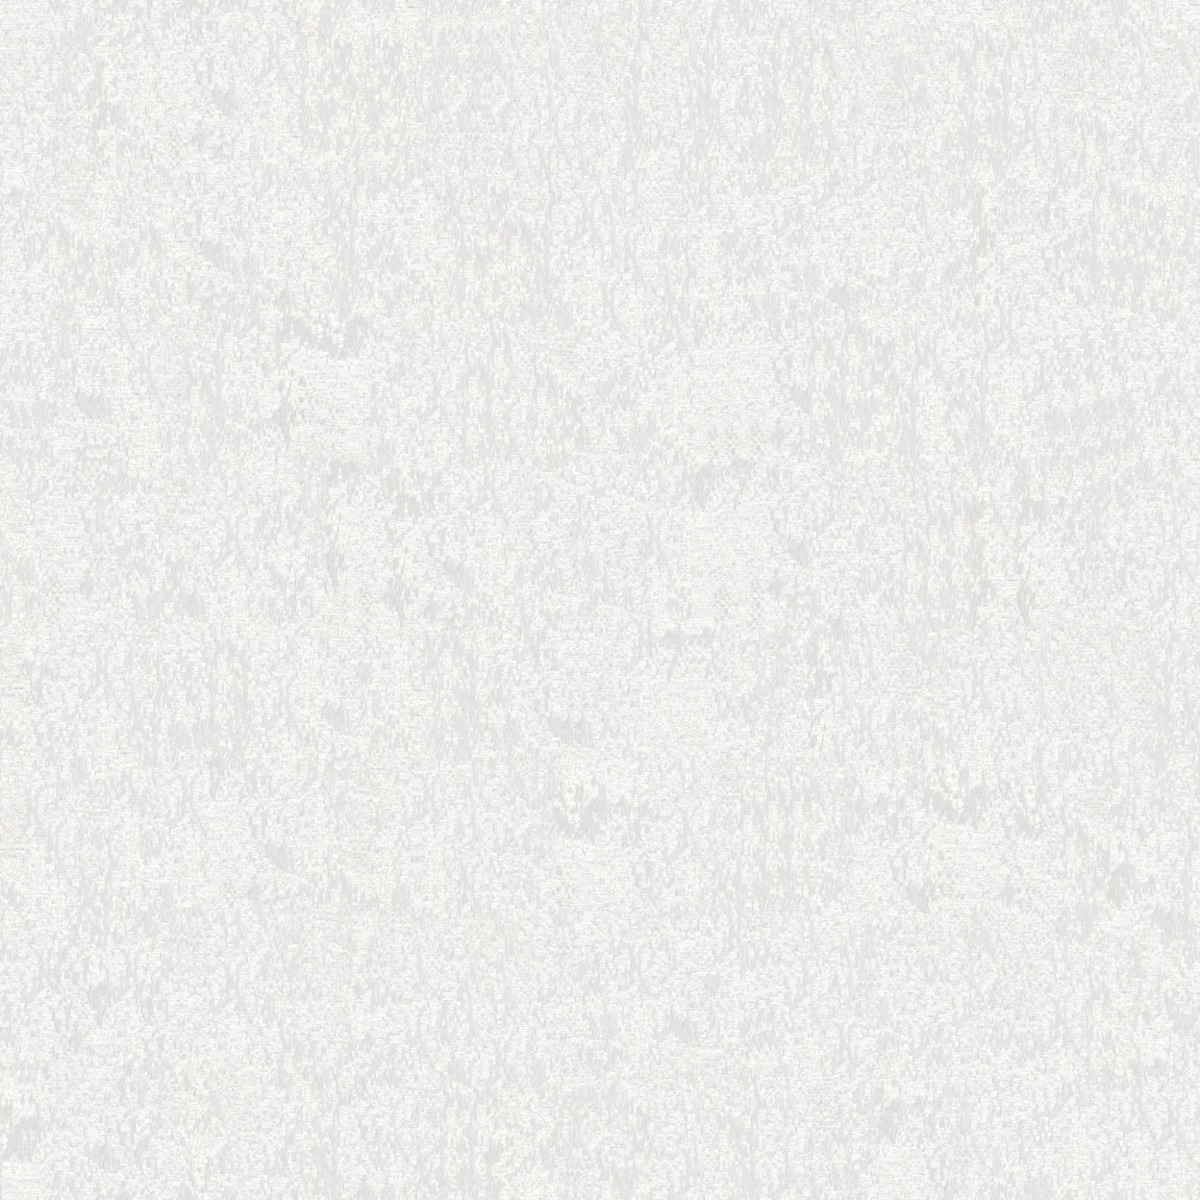 A seamless fabric texture with graphical white jacquard units arranged in a None pattern